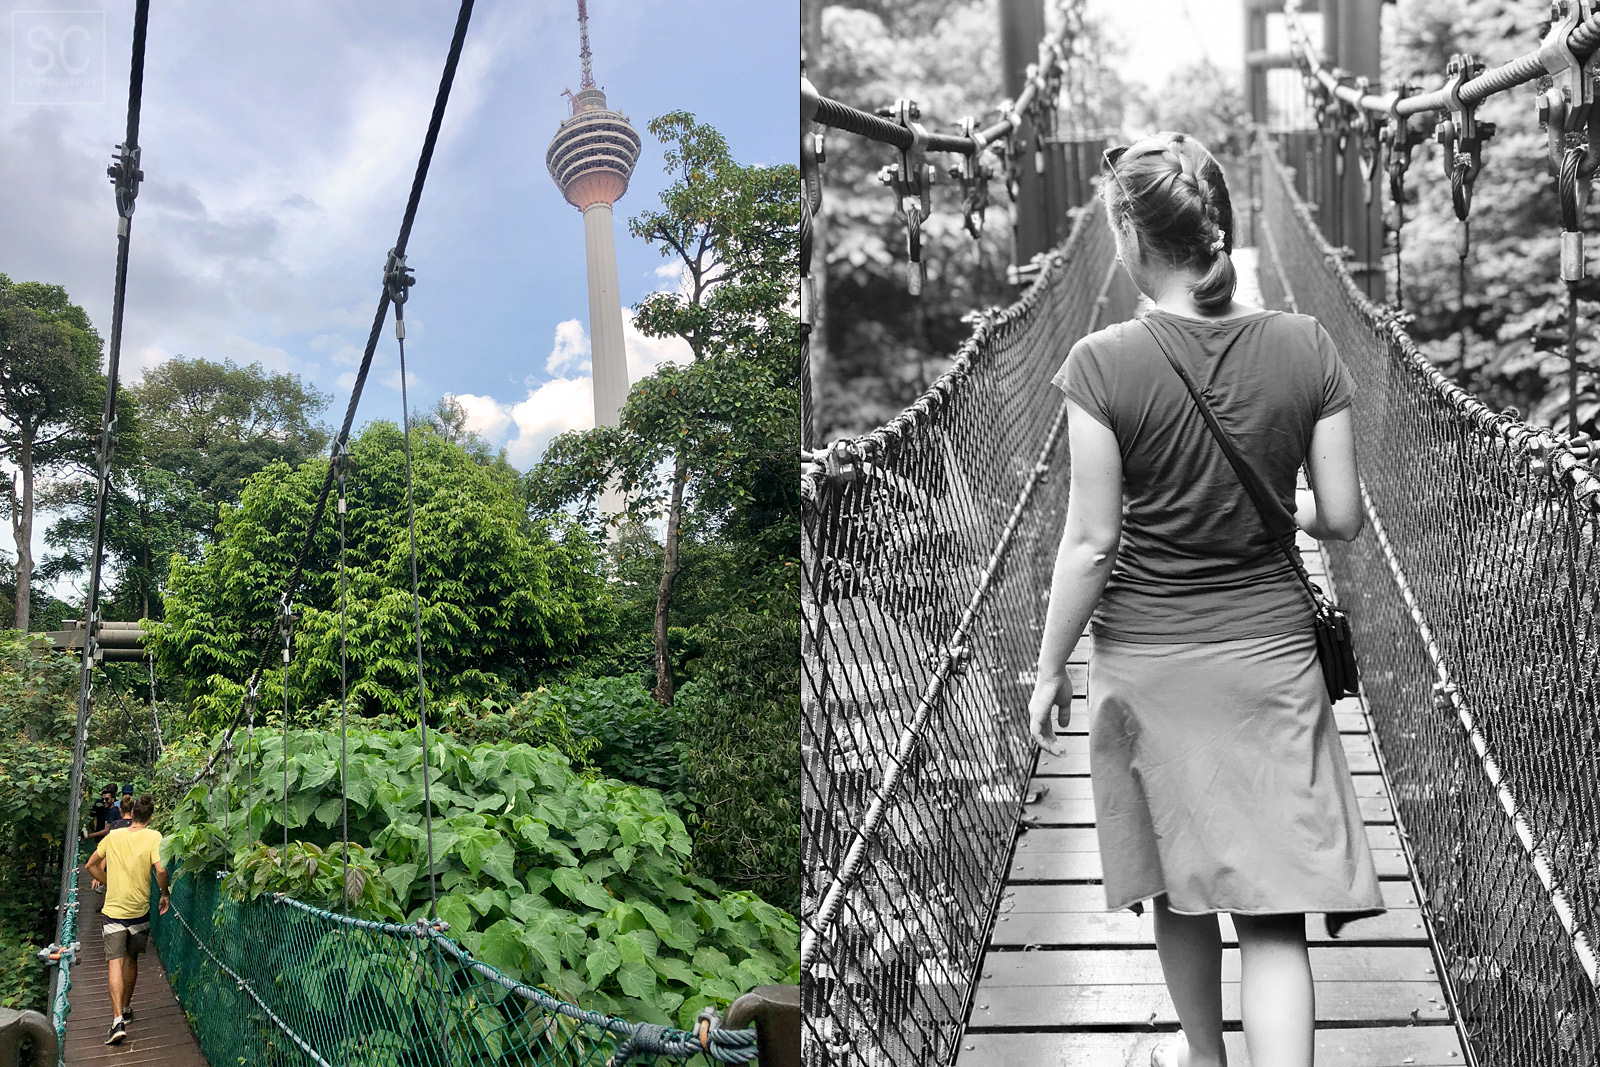 KL tower from Eco park. Very random, but I saw this guy with a man bun and a yellow shirt the next day again! 